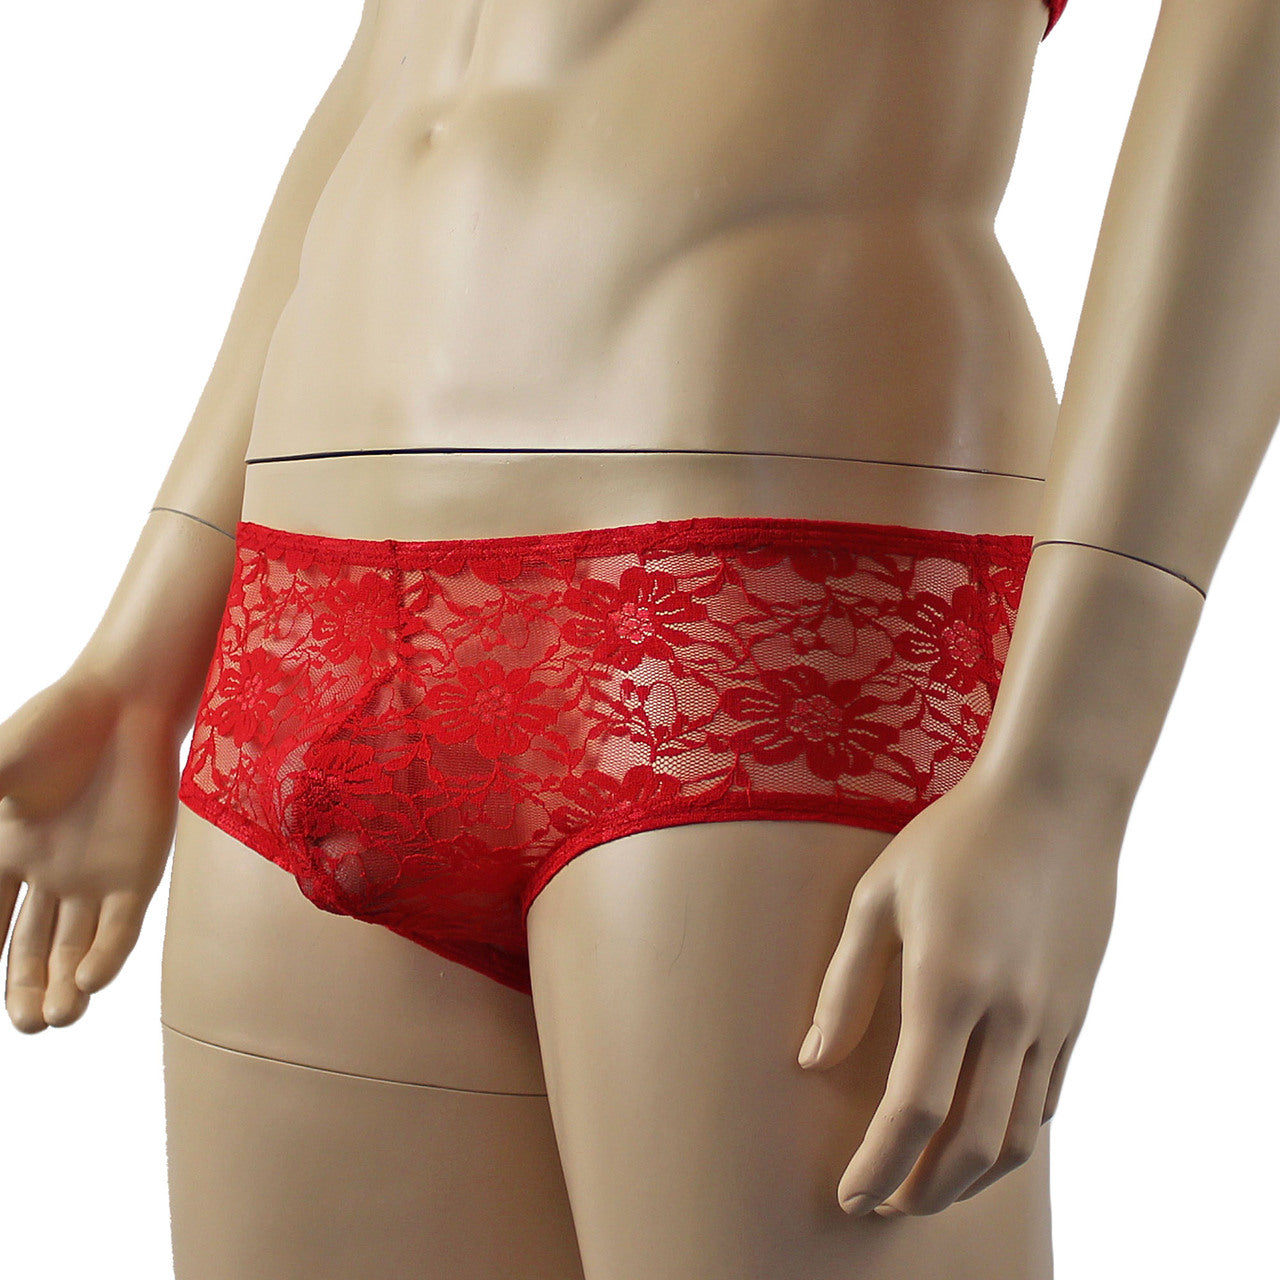 Mens Lingerie Stretch Lace  Male Panty Bikini Brief (red plus other colours)